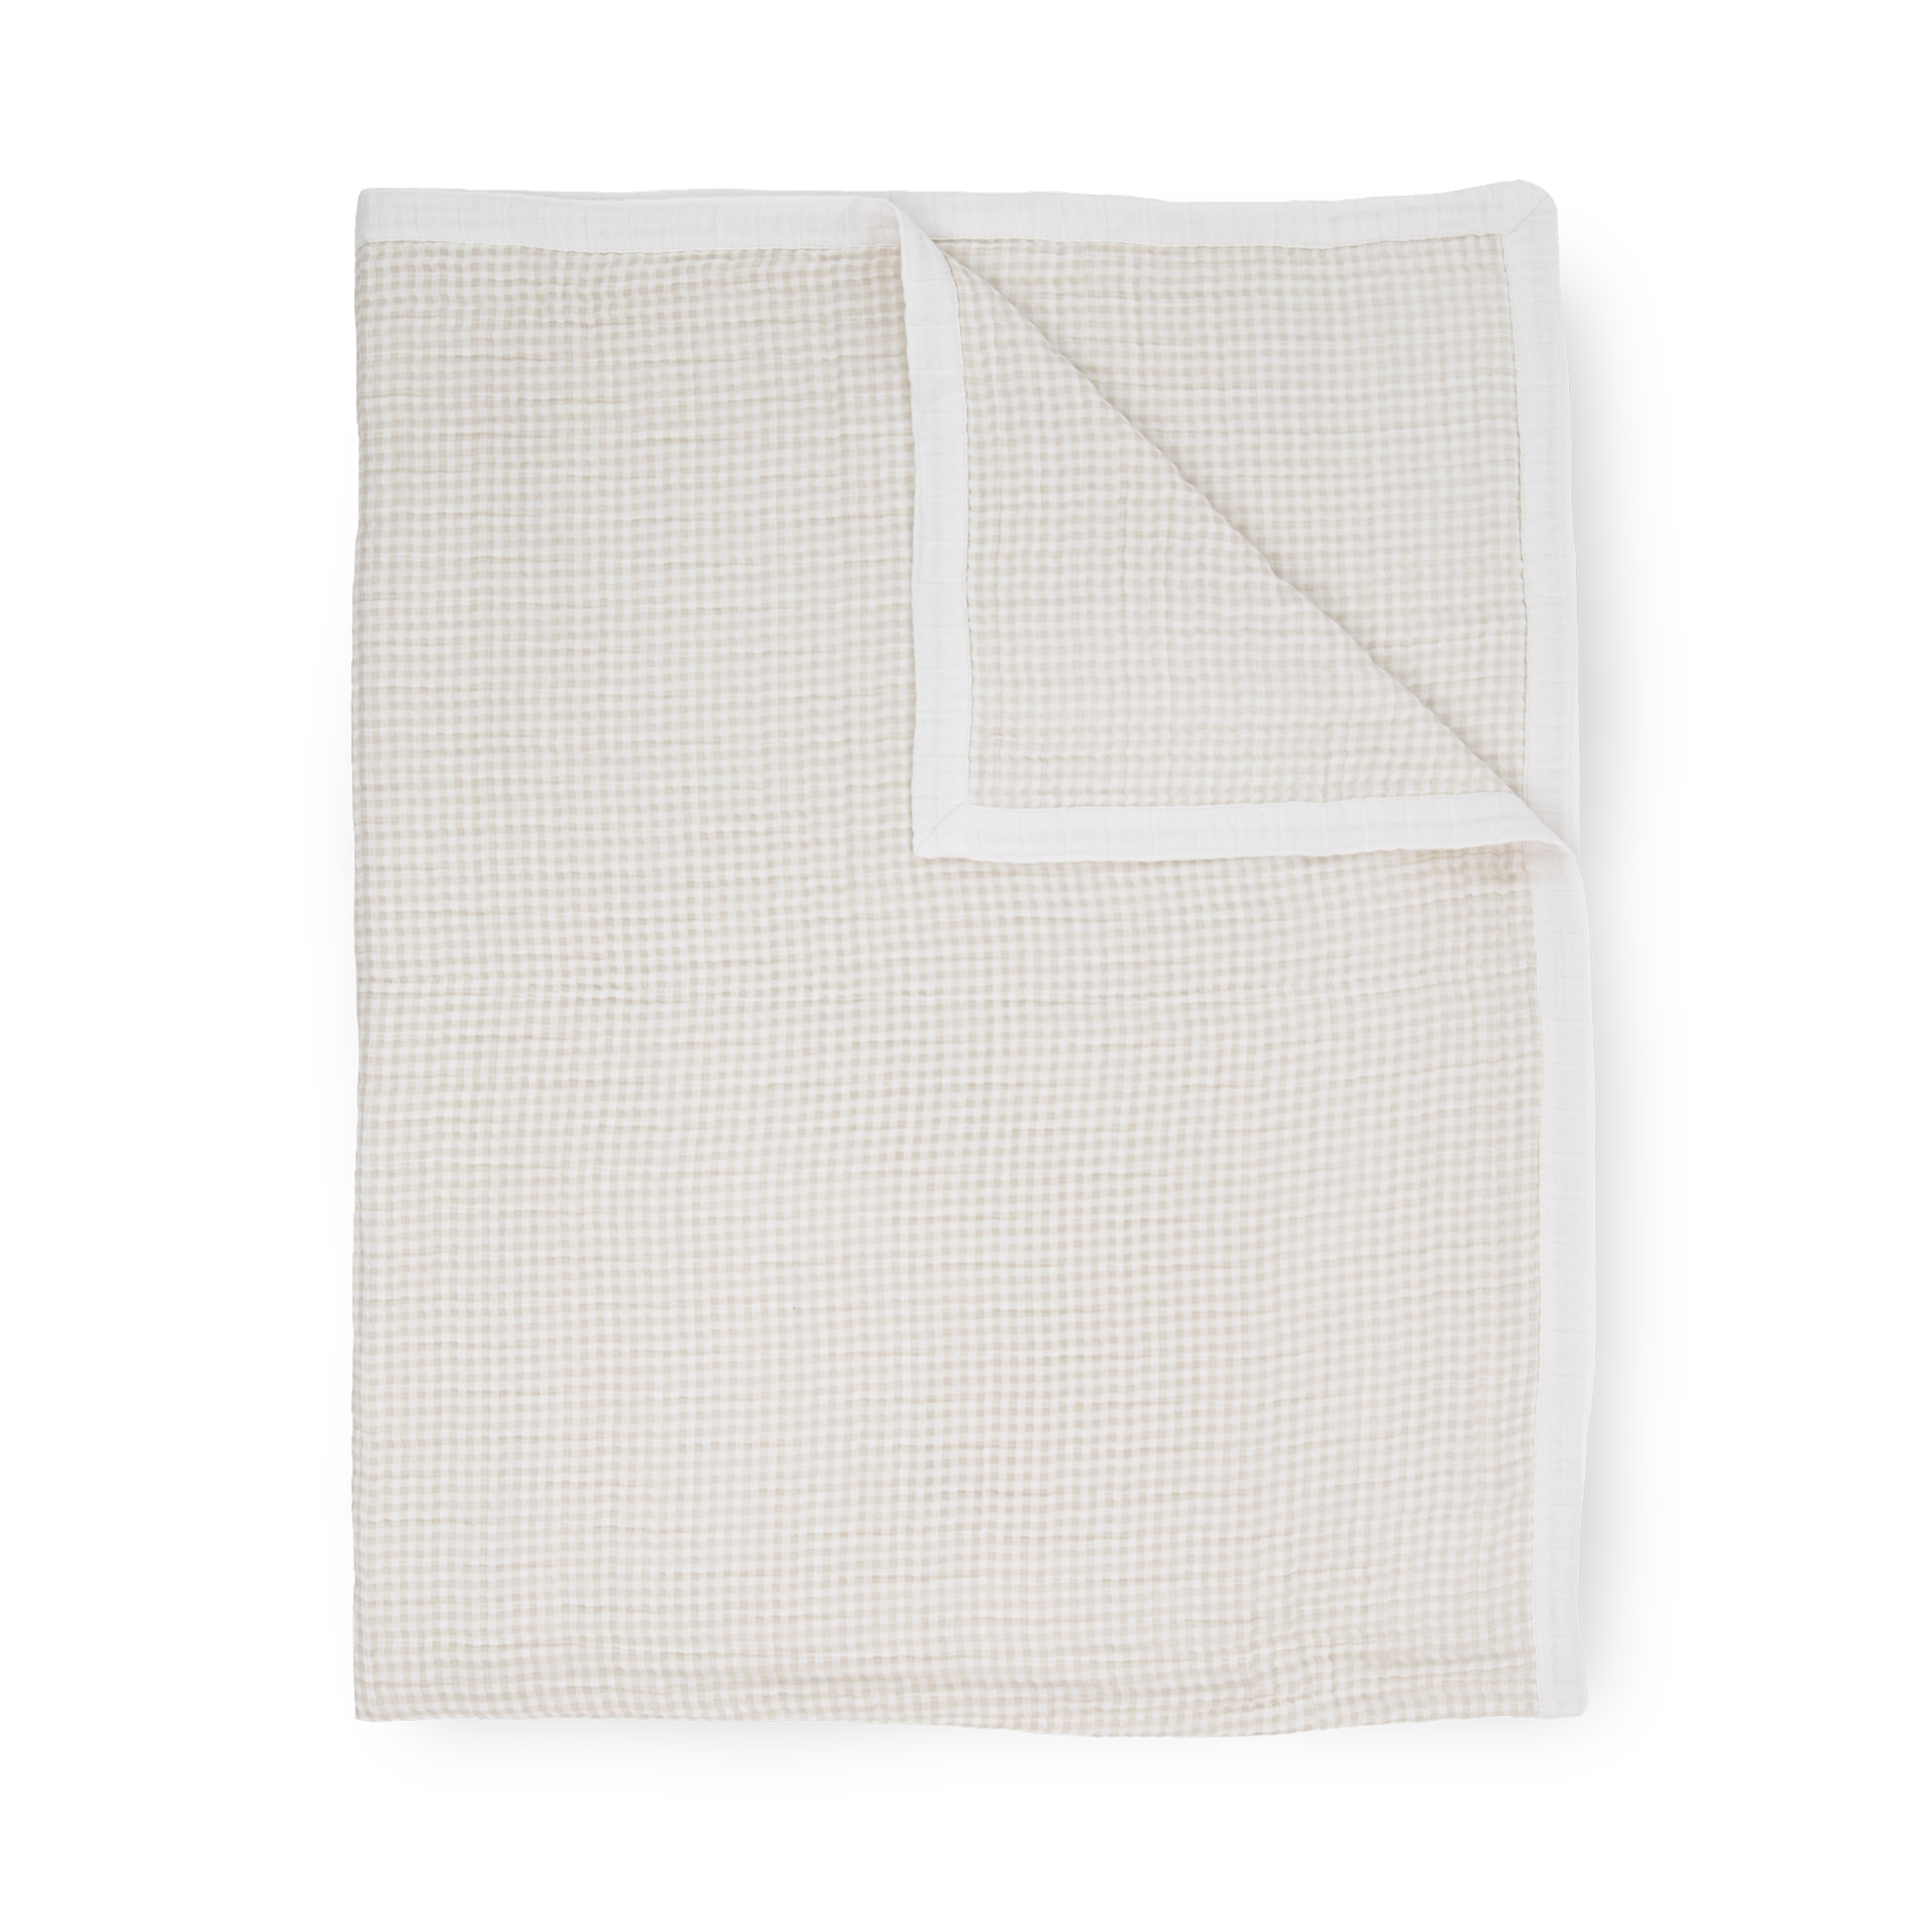 Cotton Muslin Quilted Throw - Tan Gingham